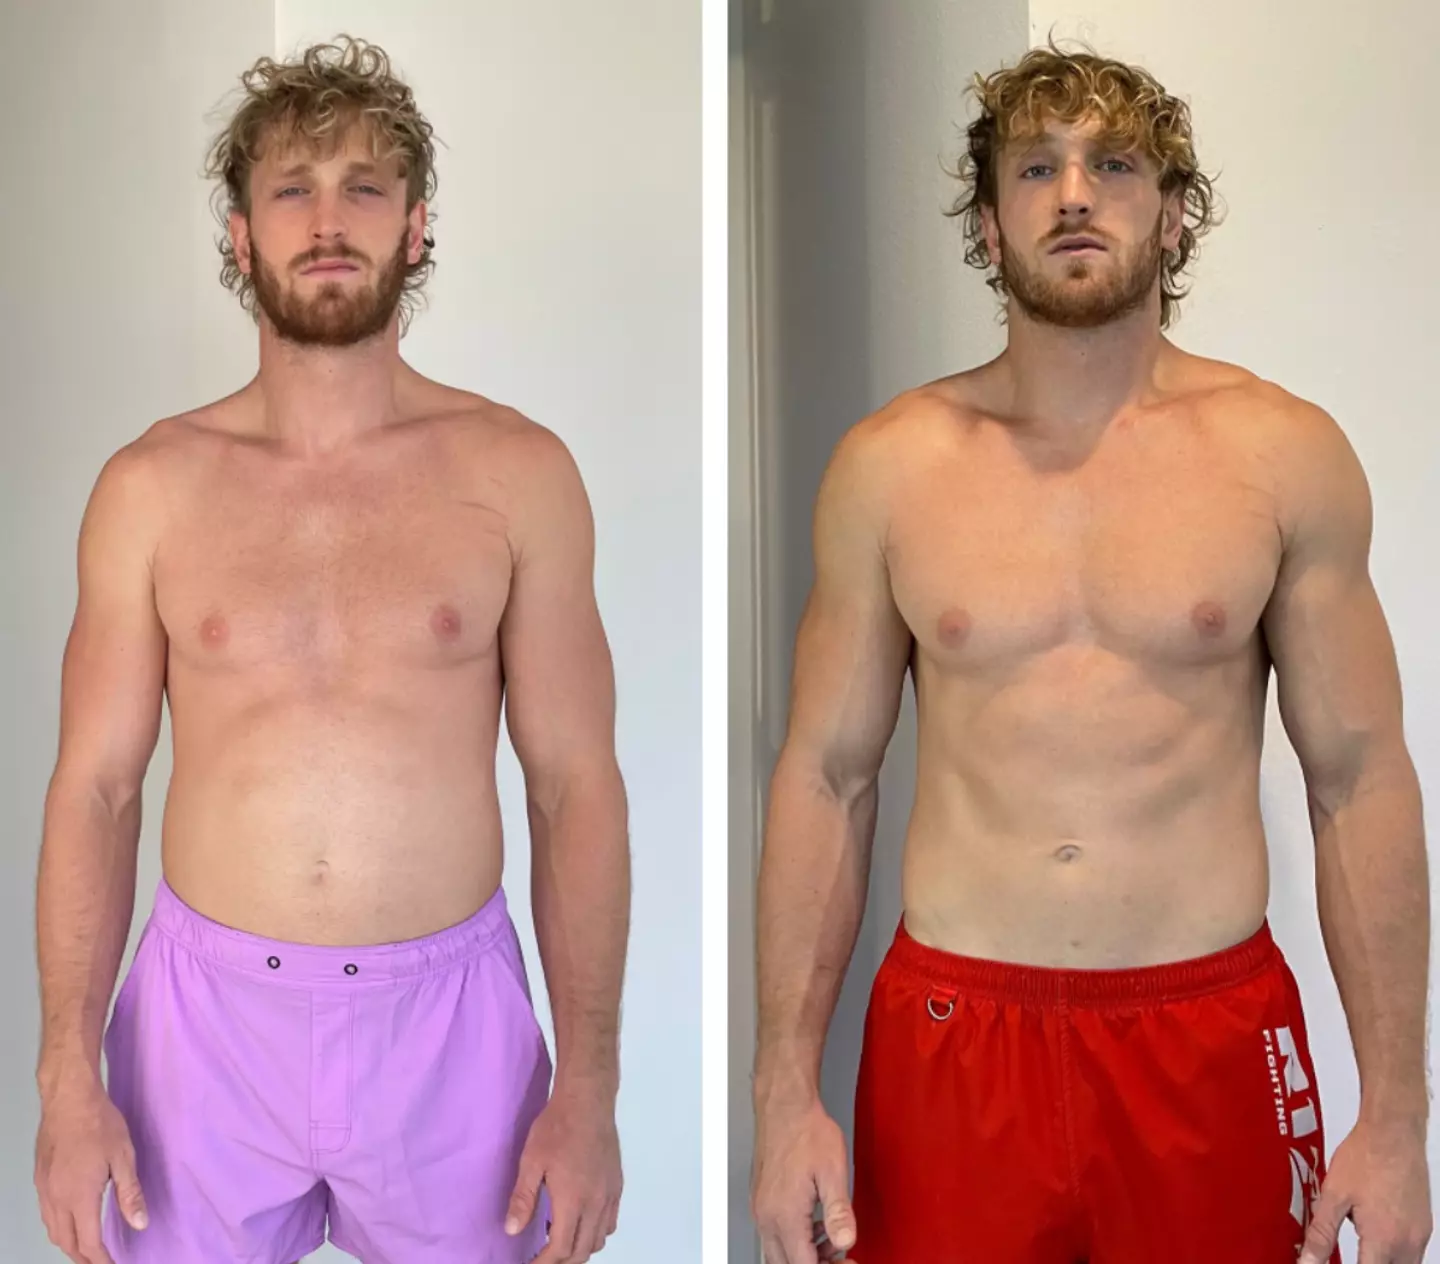 Paul claims to have made his transformation in three days.